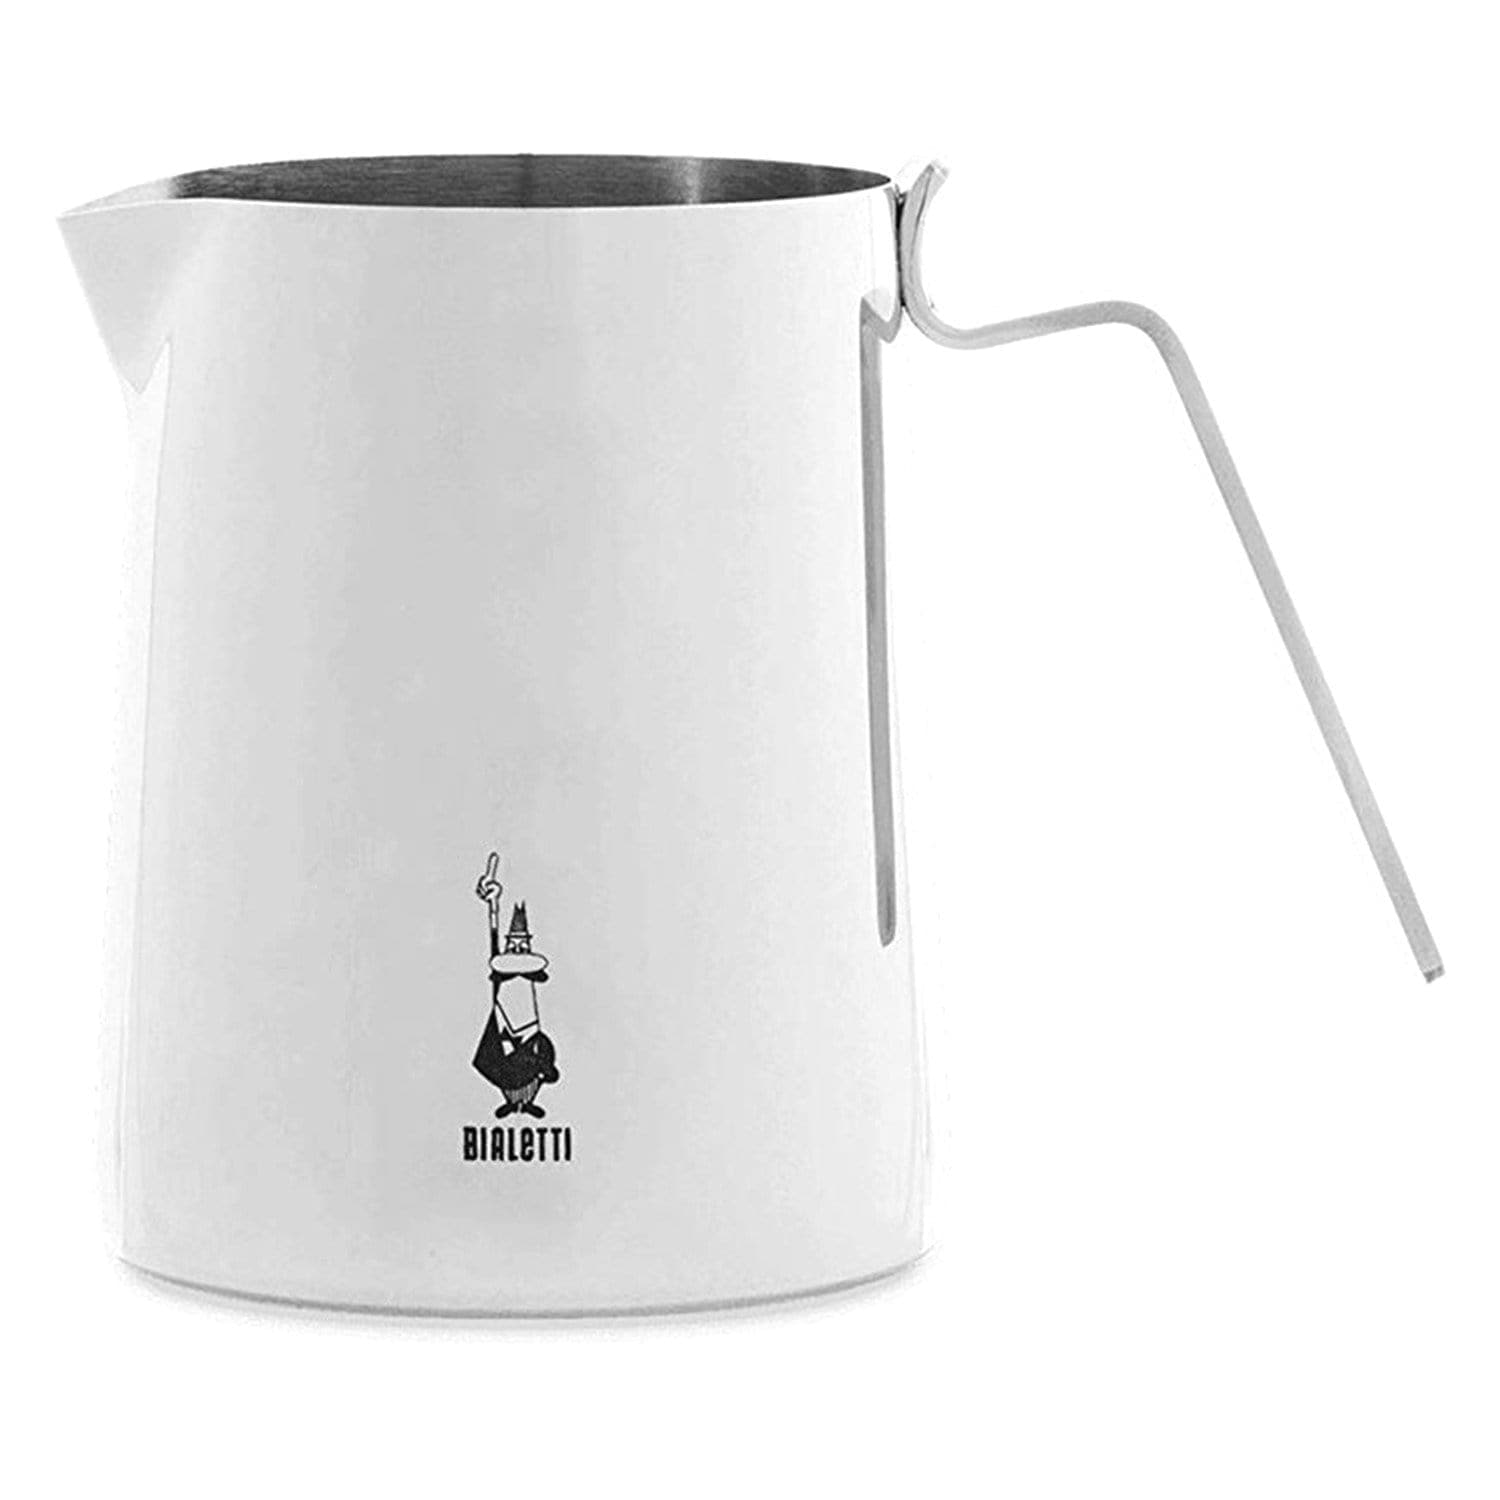 Bialetti Milk Pitcher - White and Silver, 30 Litre - 1806 - Jashanmal Home